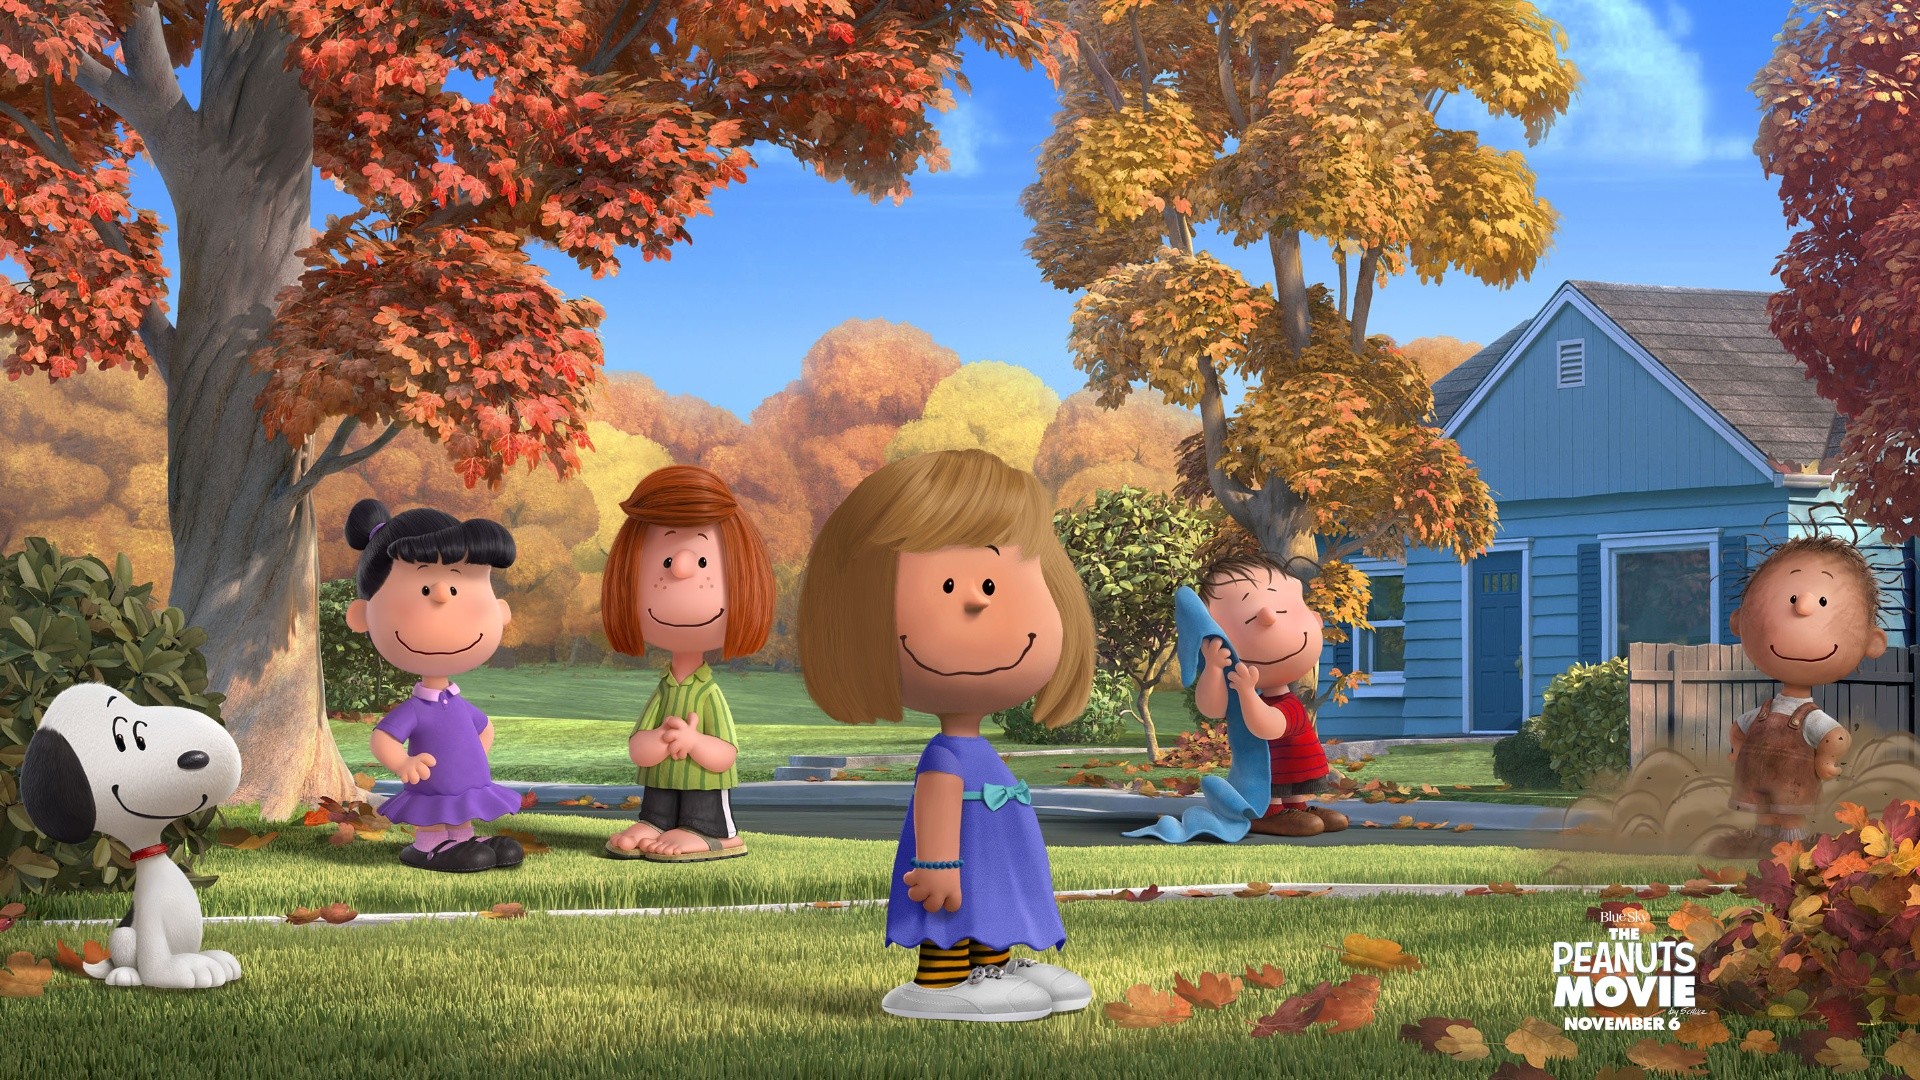 Try The Peanutize Me Character Creator For The Peanuts - Peanuts Movie Background - HD Wallpaper 